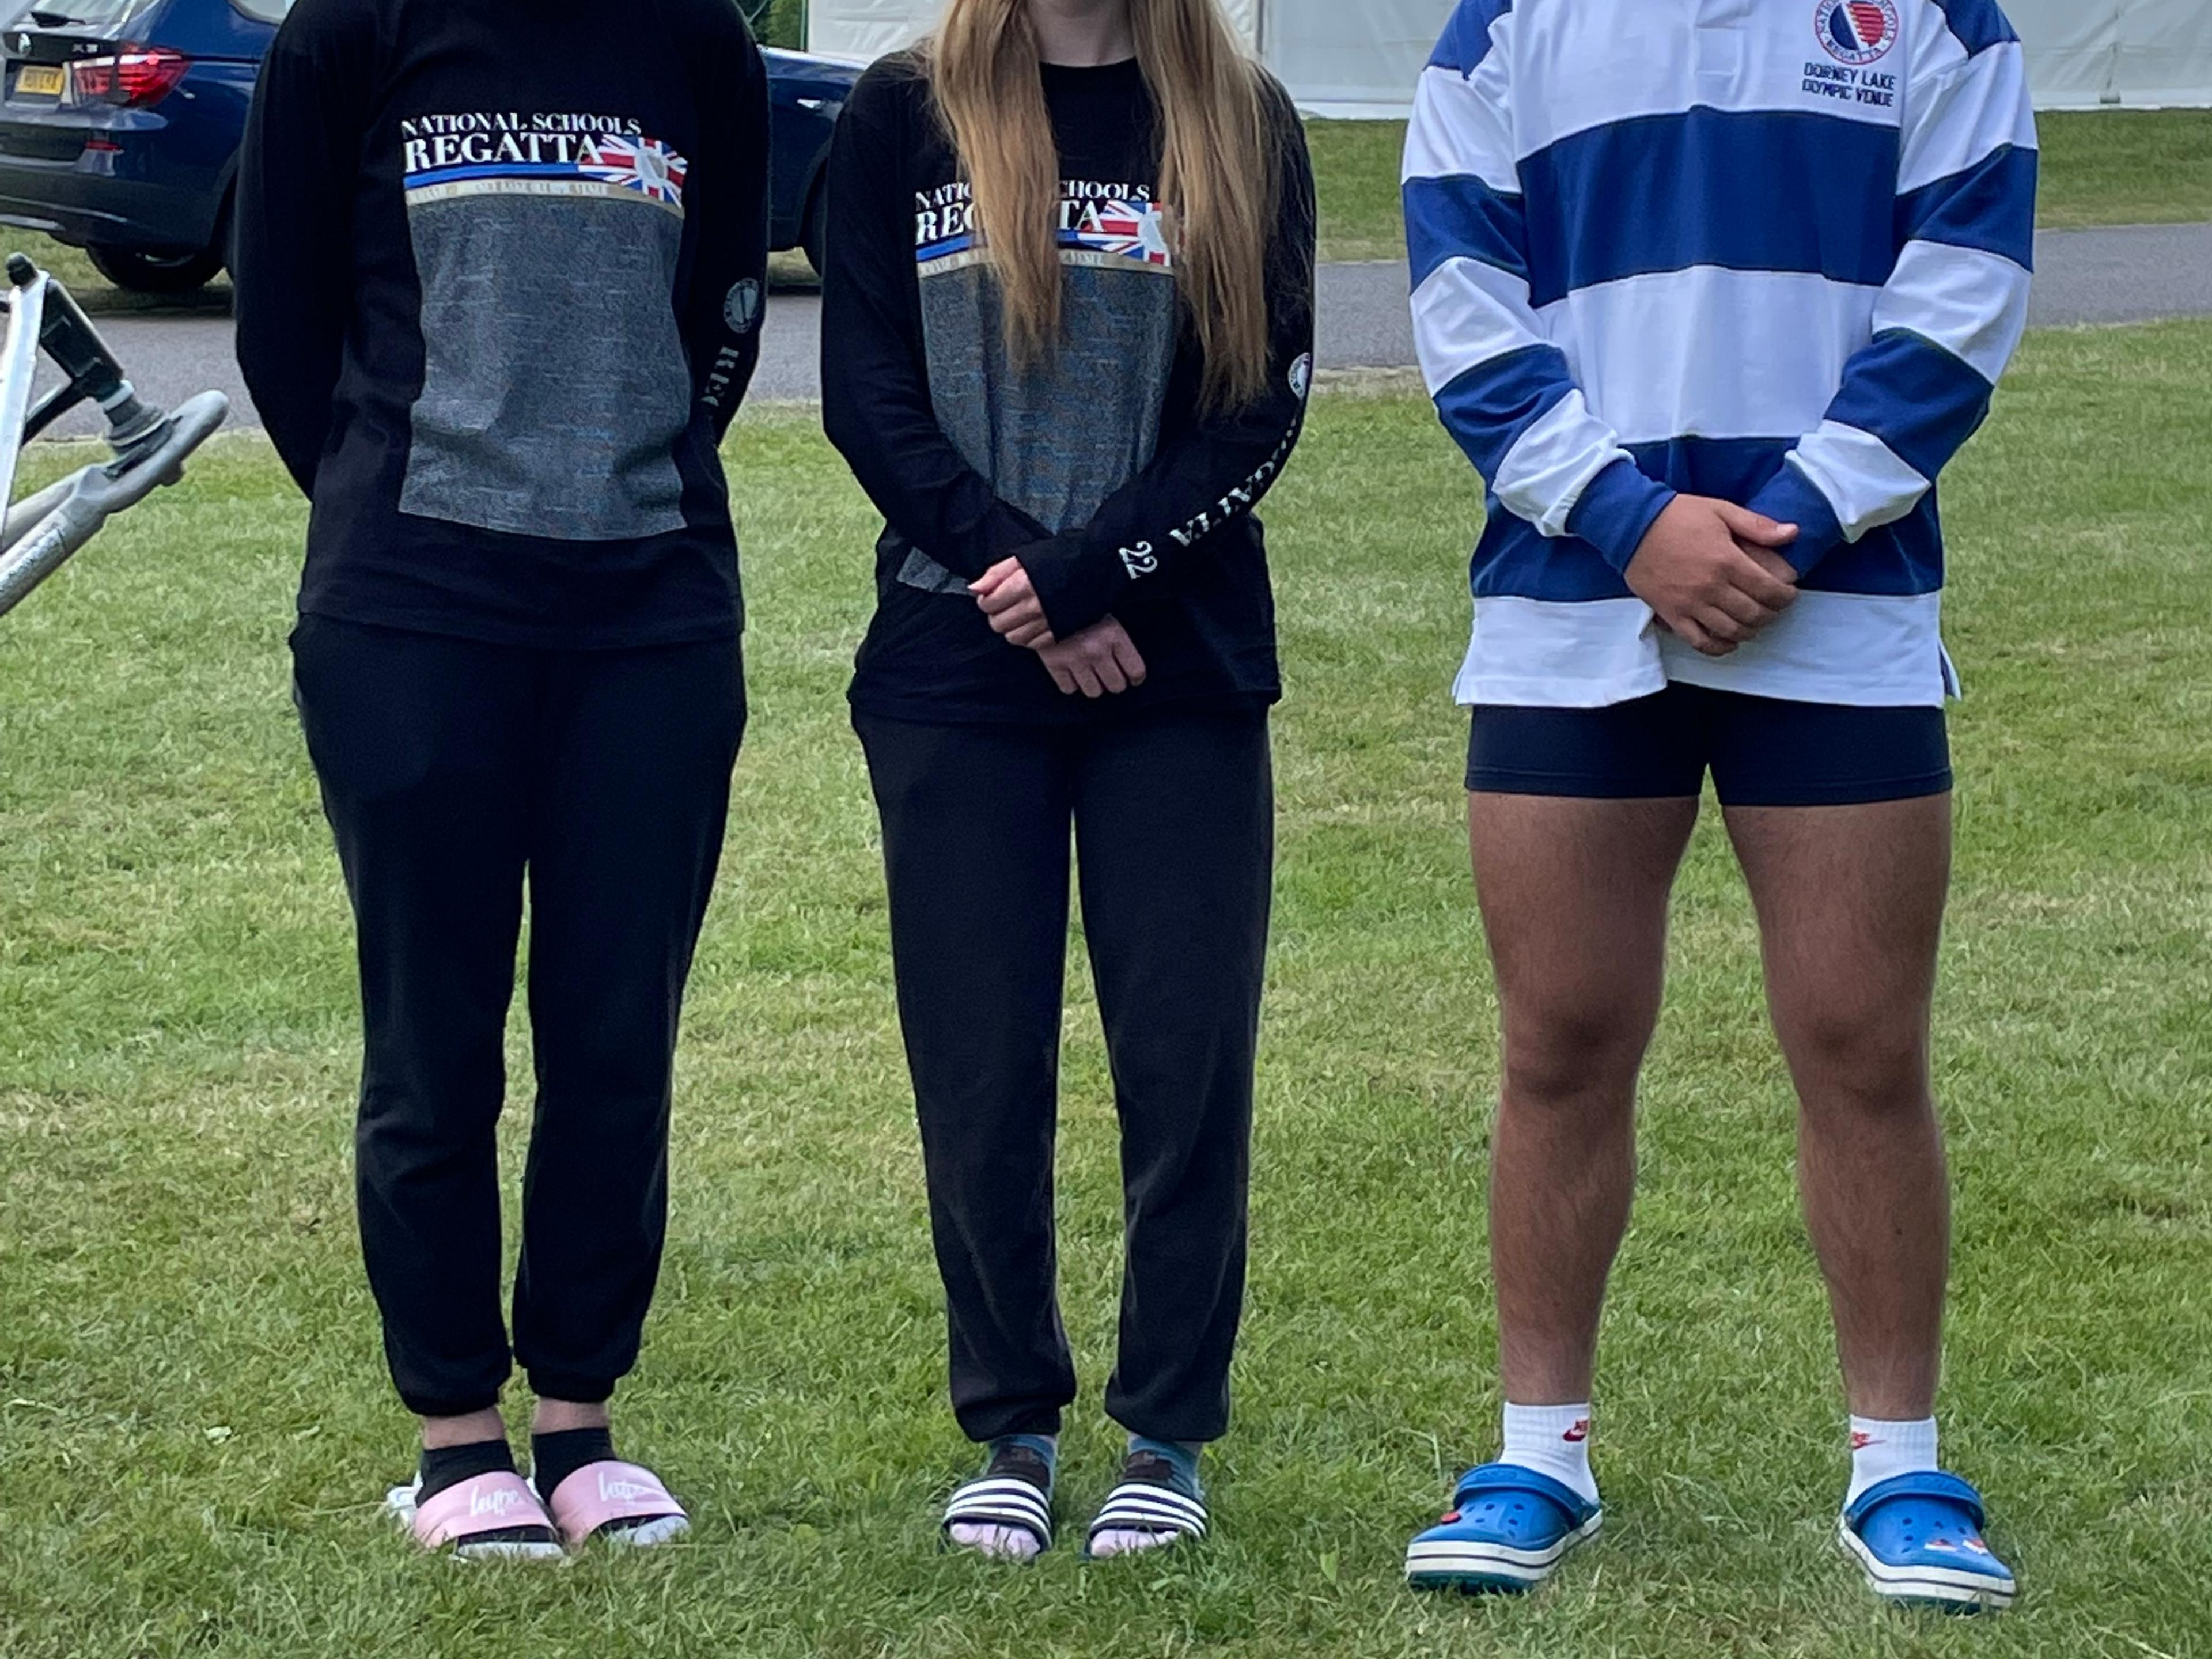 Three junior rowers standing on the grass outside a pair of white tents at a rowing event.